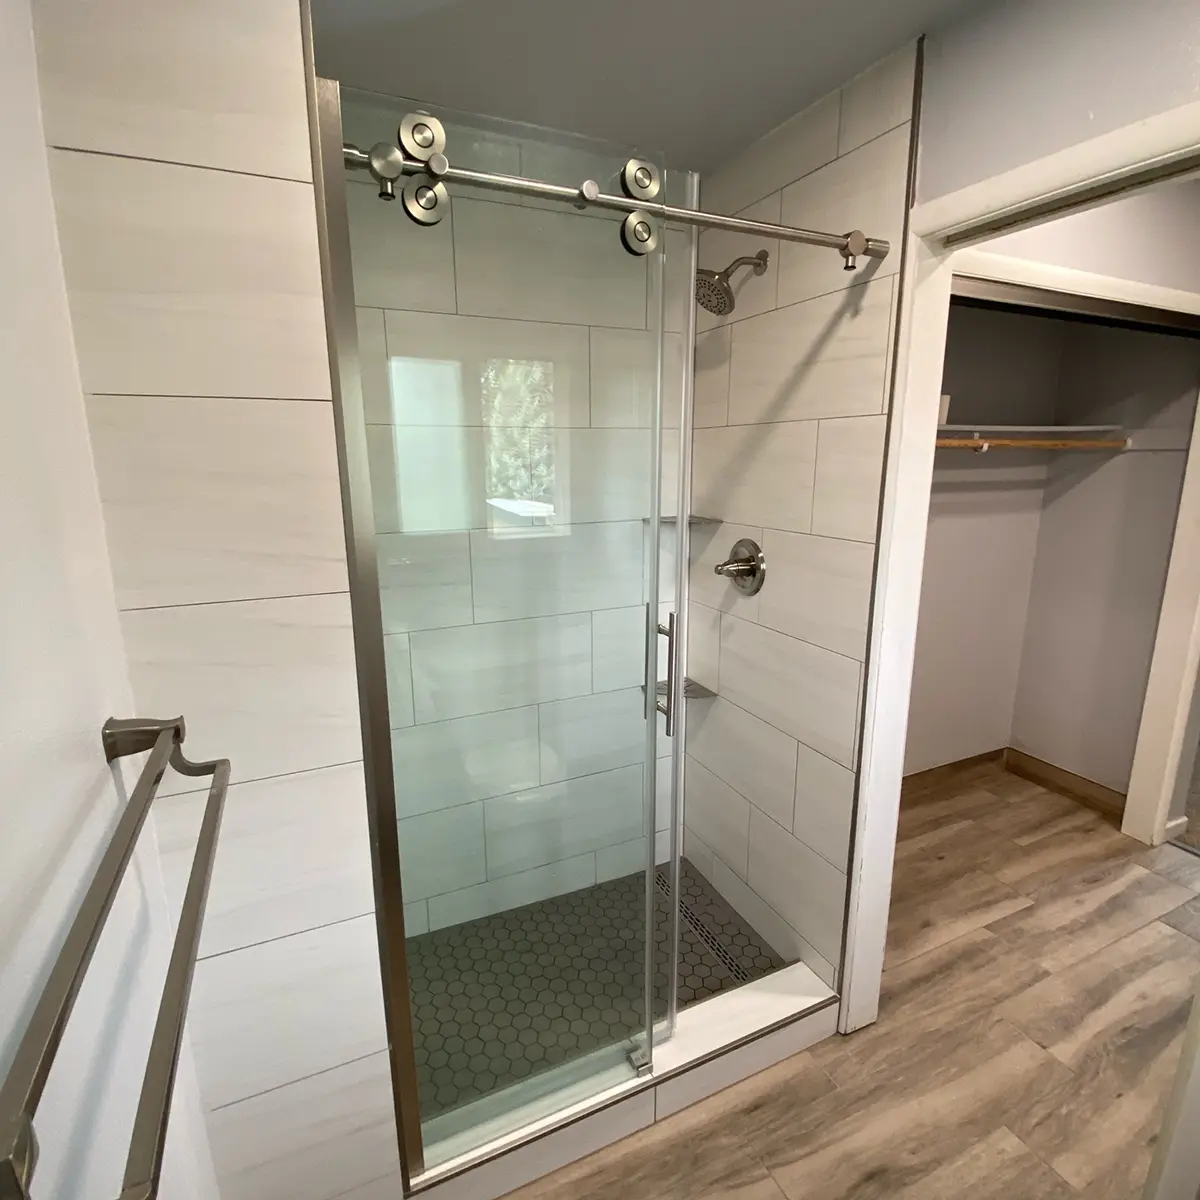 A beautiful glass shower with tile surround in a bathroom with LVP flooring